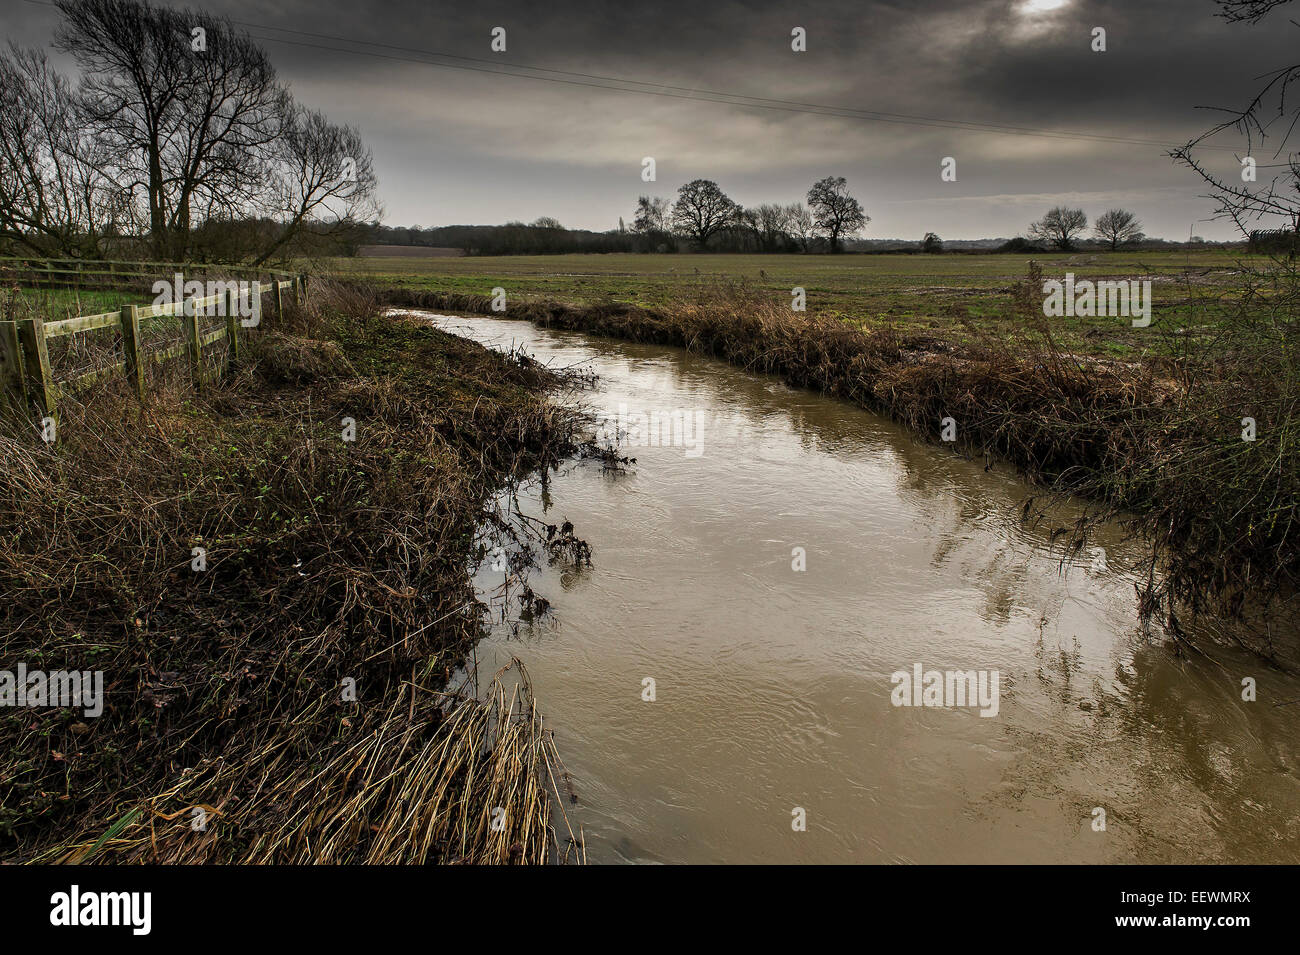 The River Wid in Essex. Stock Photo